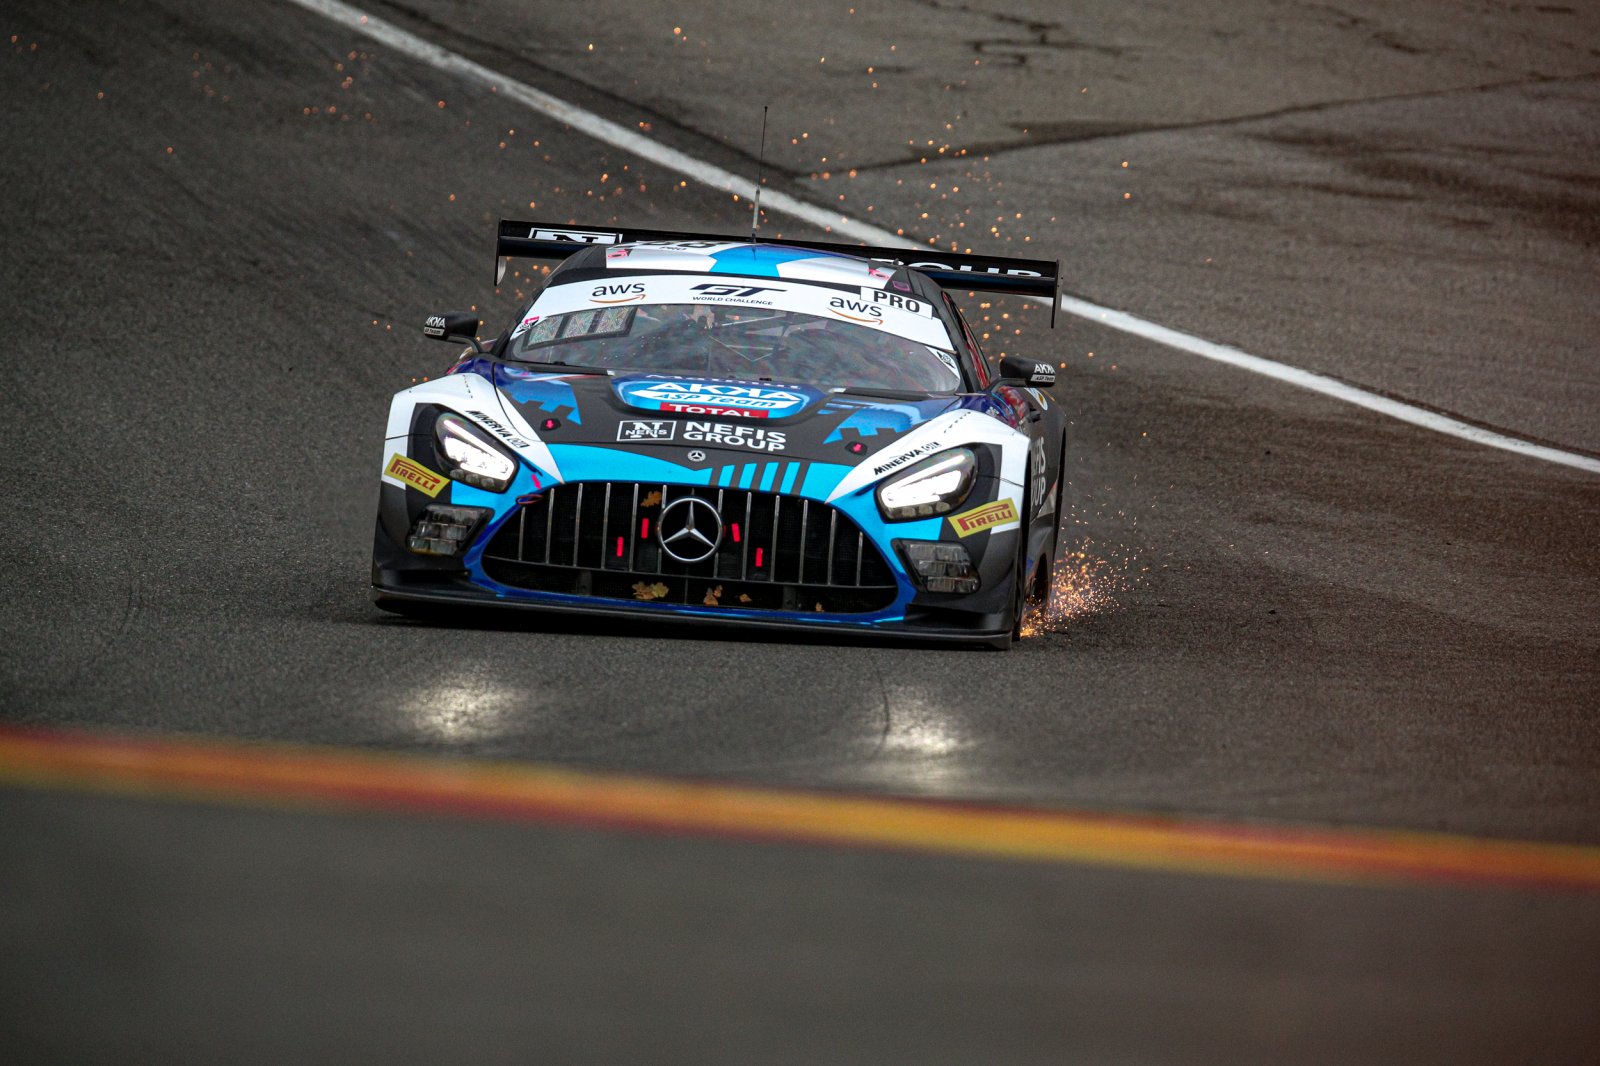 2-Hour Update: Marciello holds on to narrow lead for Mercedes-AMG Team AKKA ASP